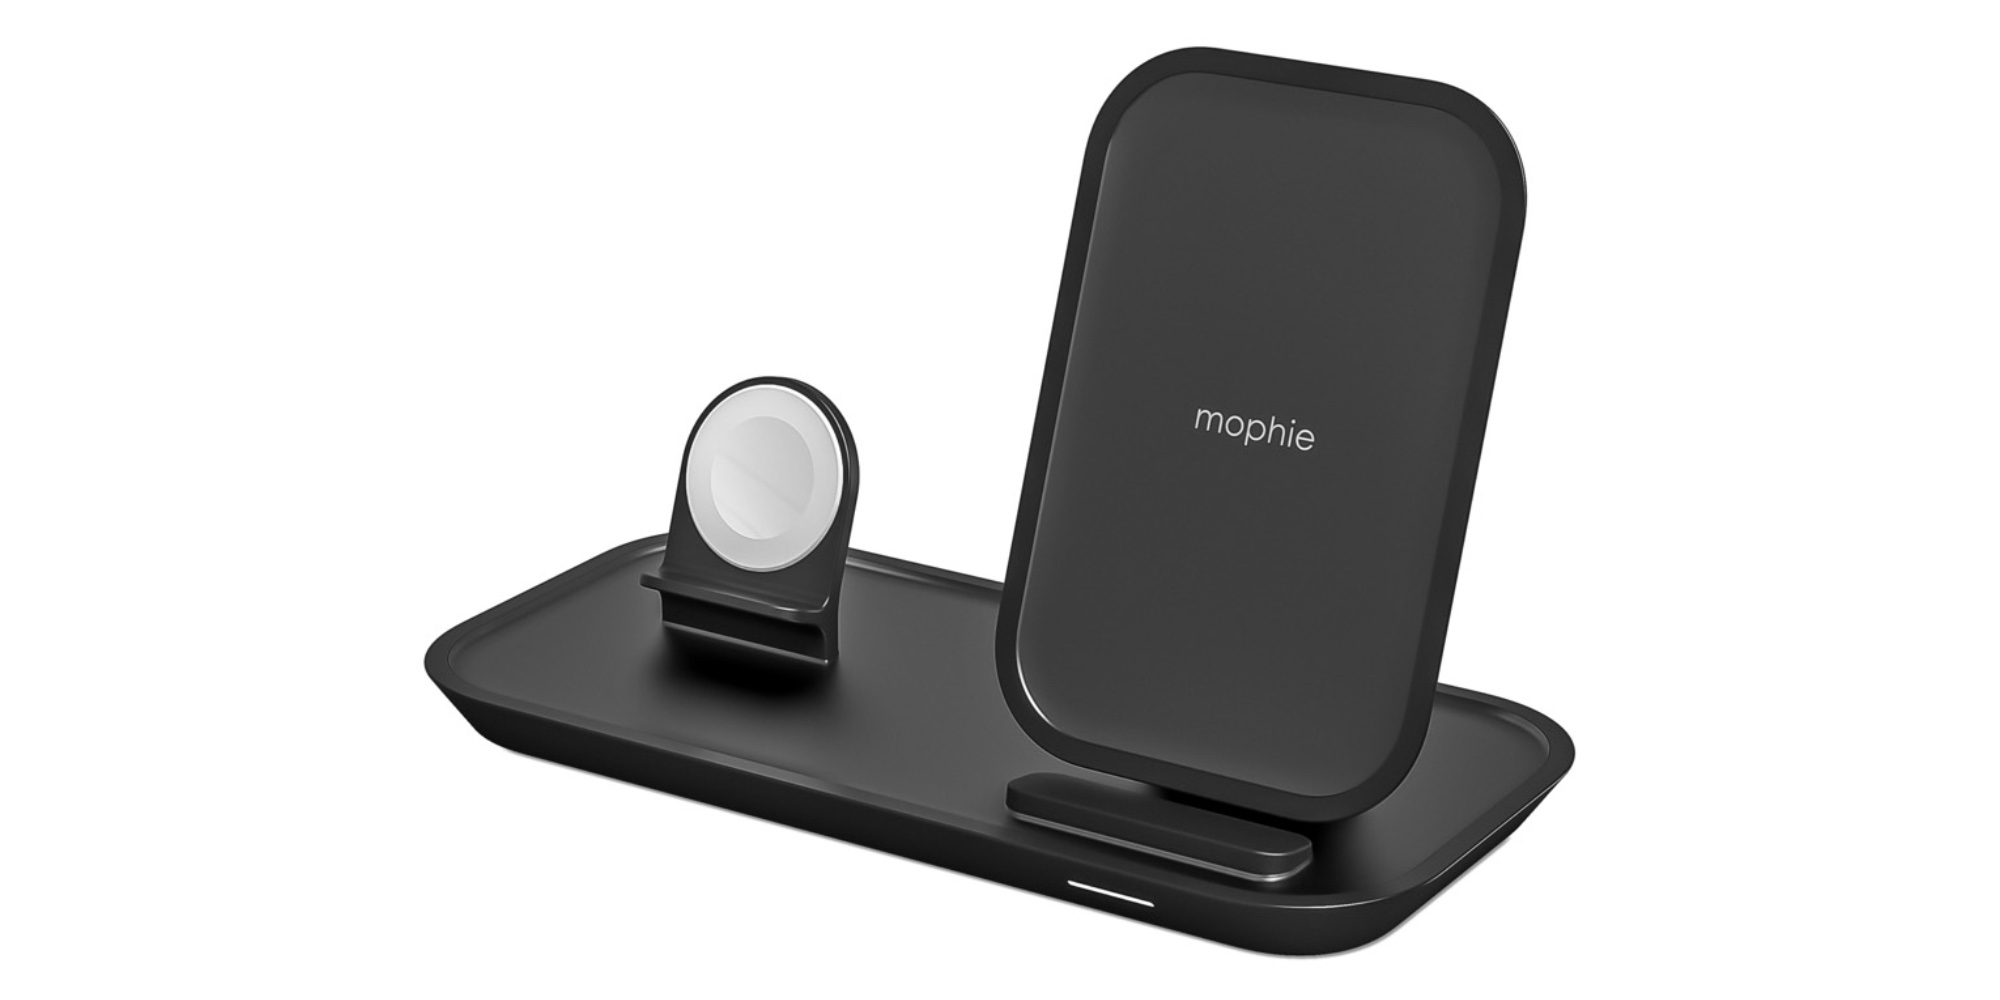 mophie wireless charging stations debut with three new options - 9to5Toys